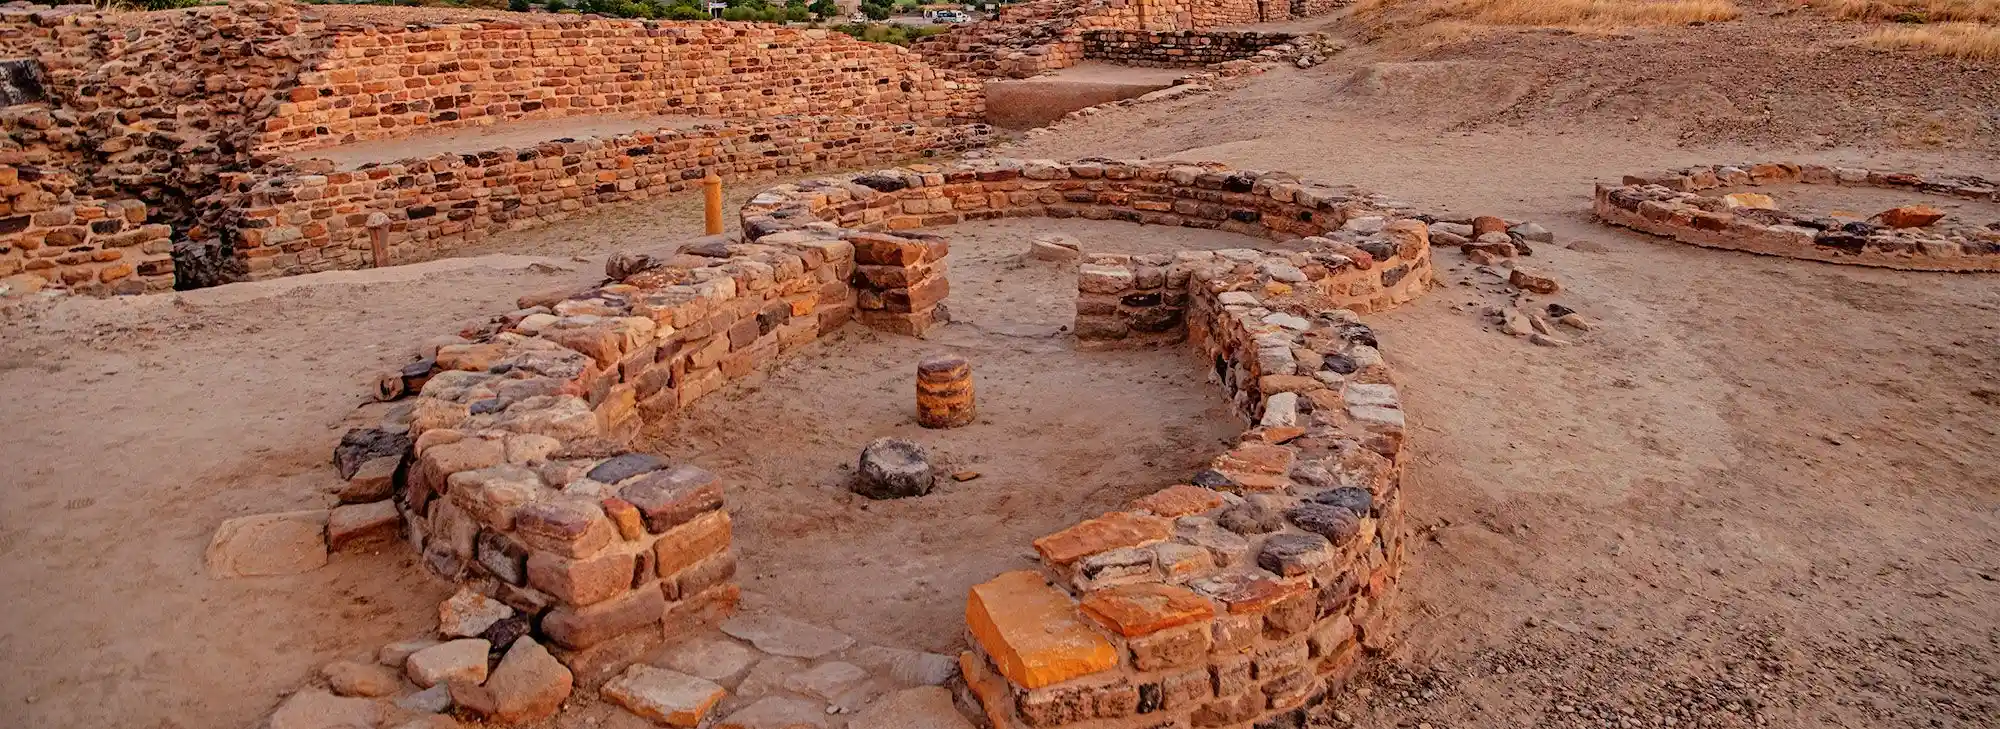 Well facilities in Dholavira ; Source: gujarattourism.com